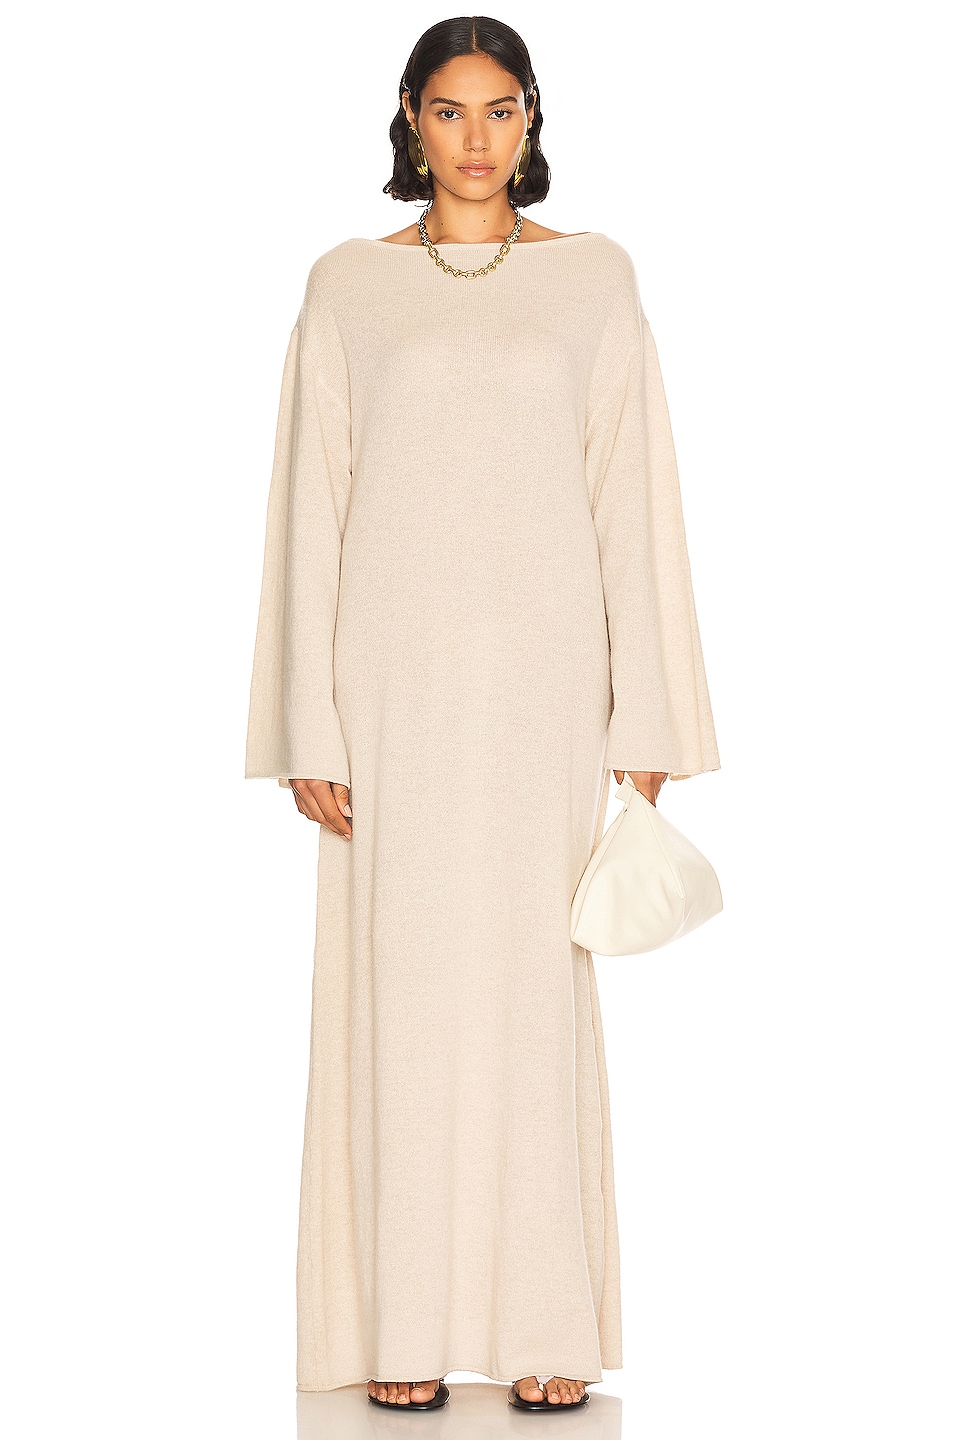 Image 1 of Helsa Boden Cashmere Maxi Dress in Heather Oatmeal